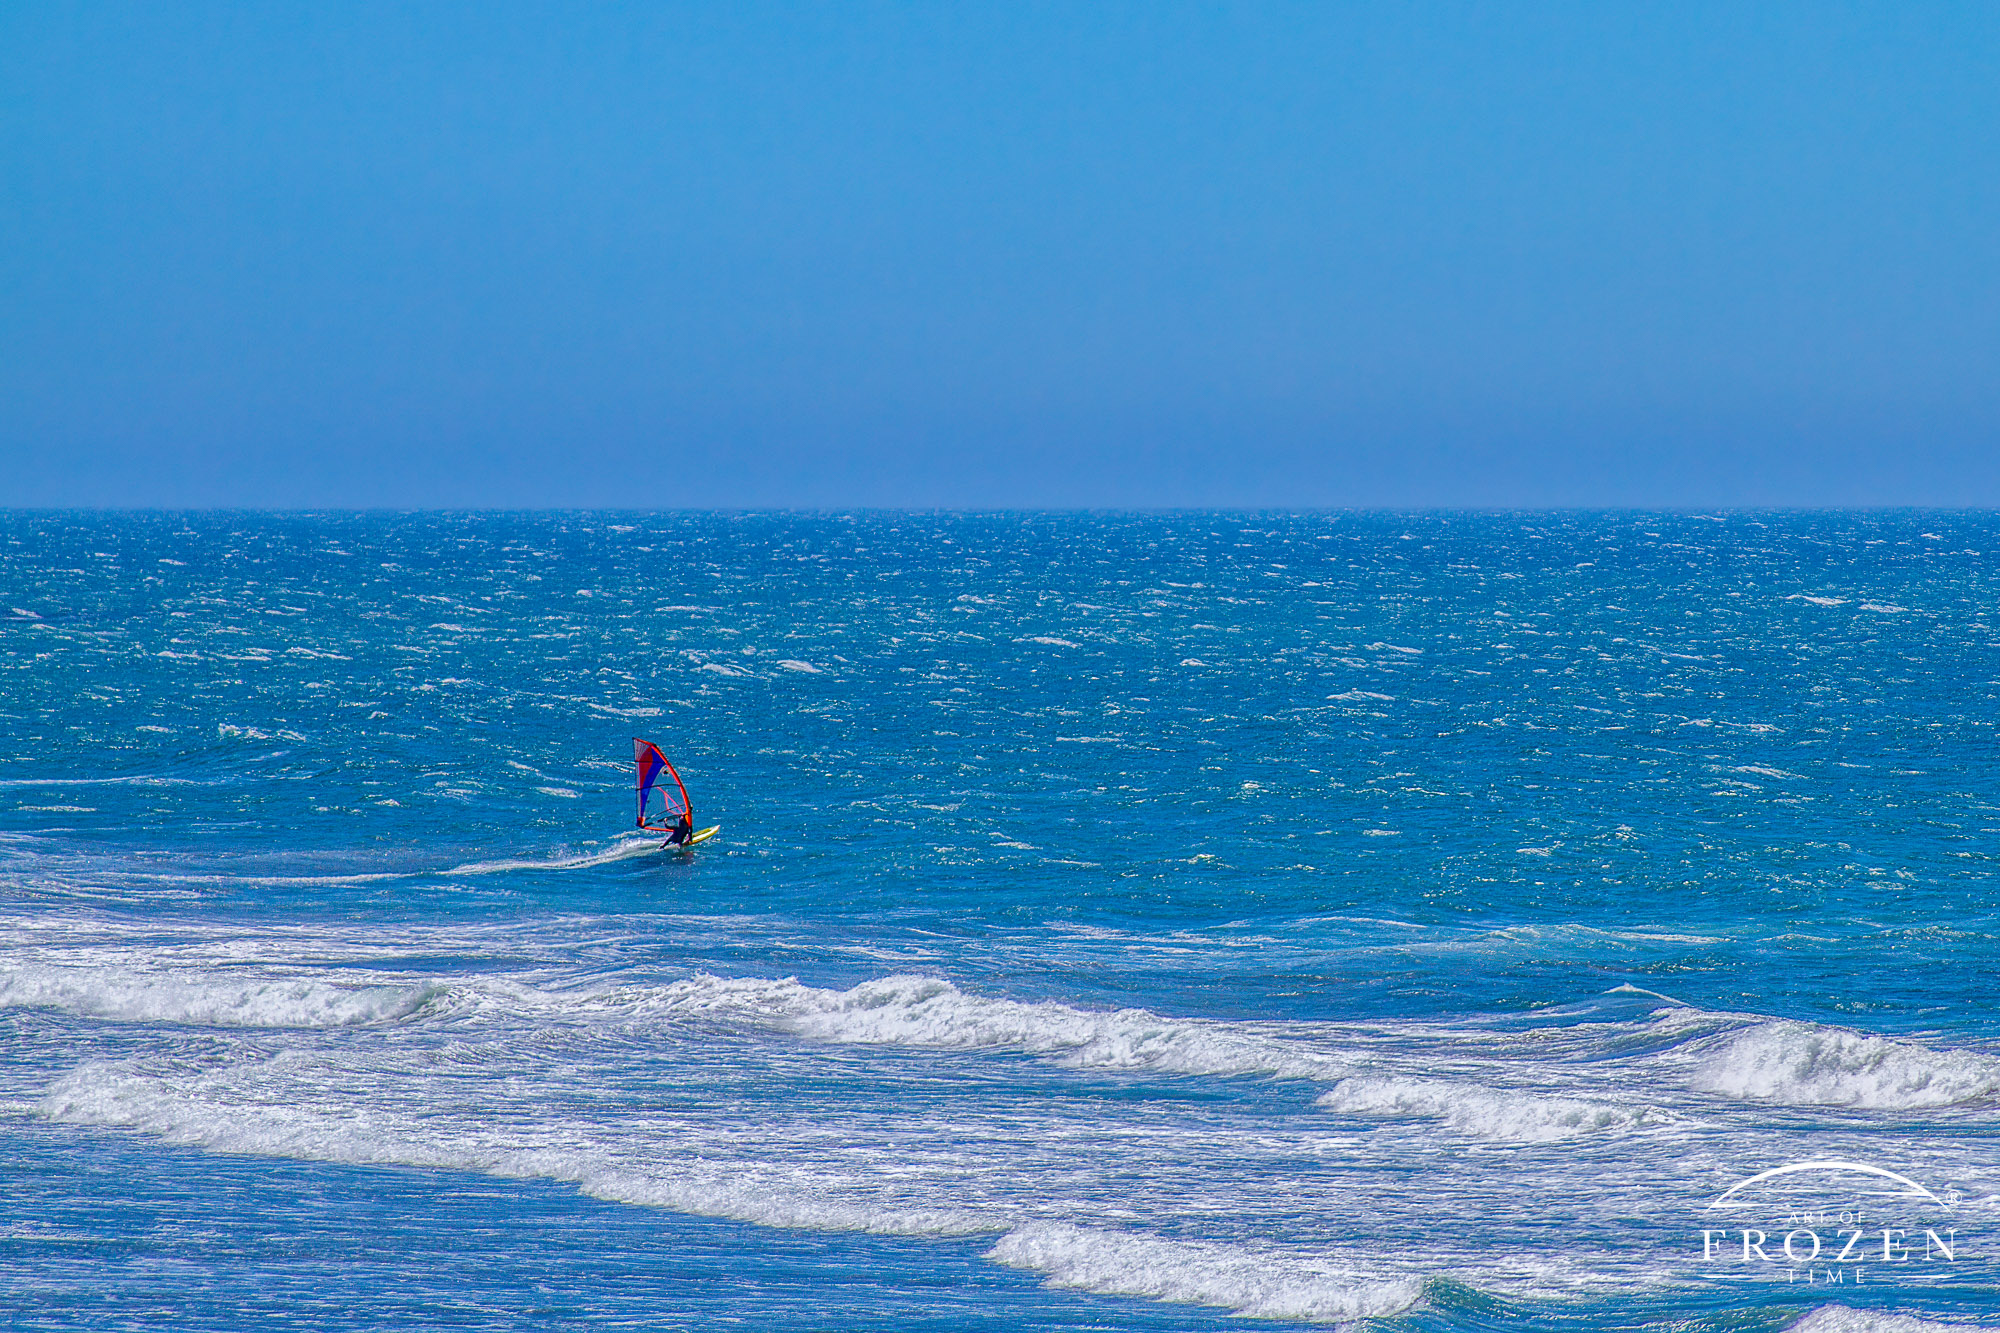 A windsurfer enjoying the blue ocean waters as the overhead sun makes the water sparkle